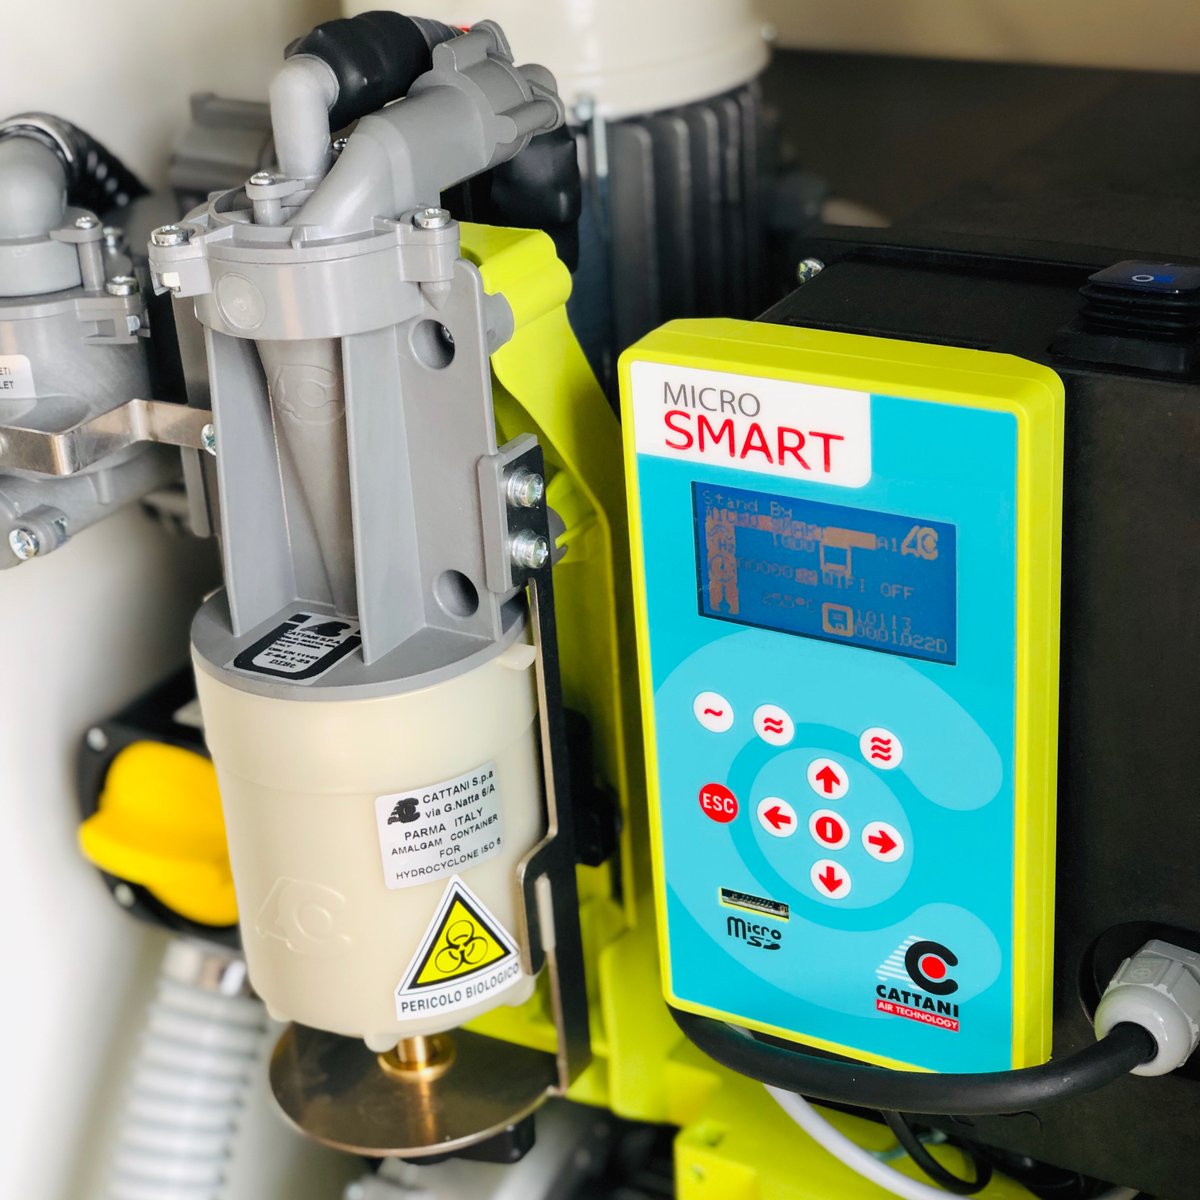 New Cattani Micro Smart suction pump installed in Swansea today. Customer had a loan pump of ours whilst there we waiting for new one to be delivered.  Making sure they had no down time 👍🏻 #woodlanedental #dentalequipmentuk #dentistryuk #dentalengineer